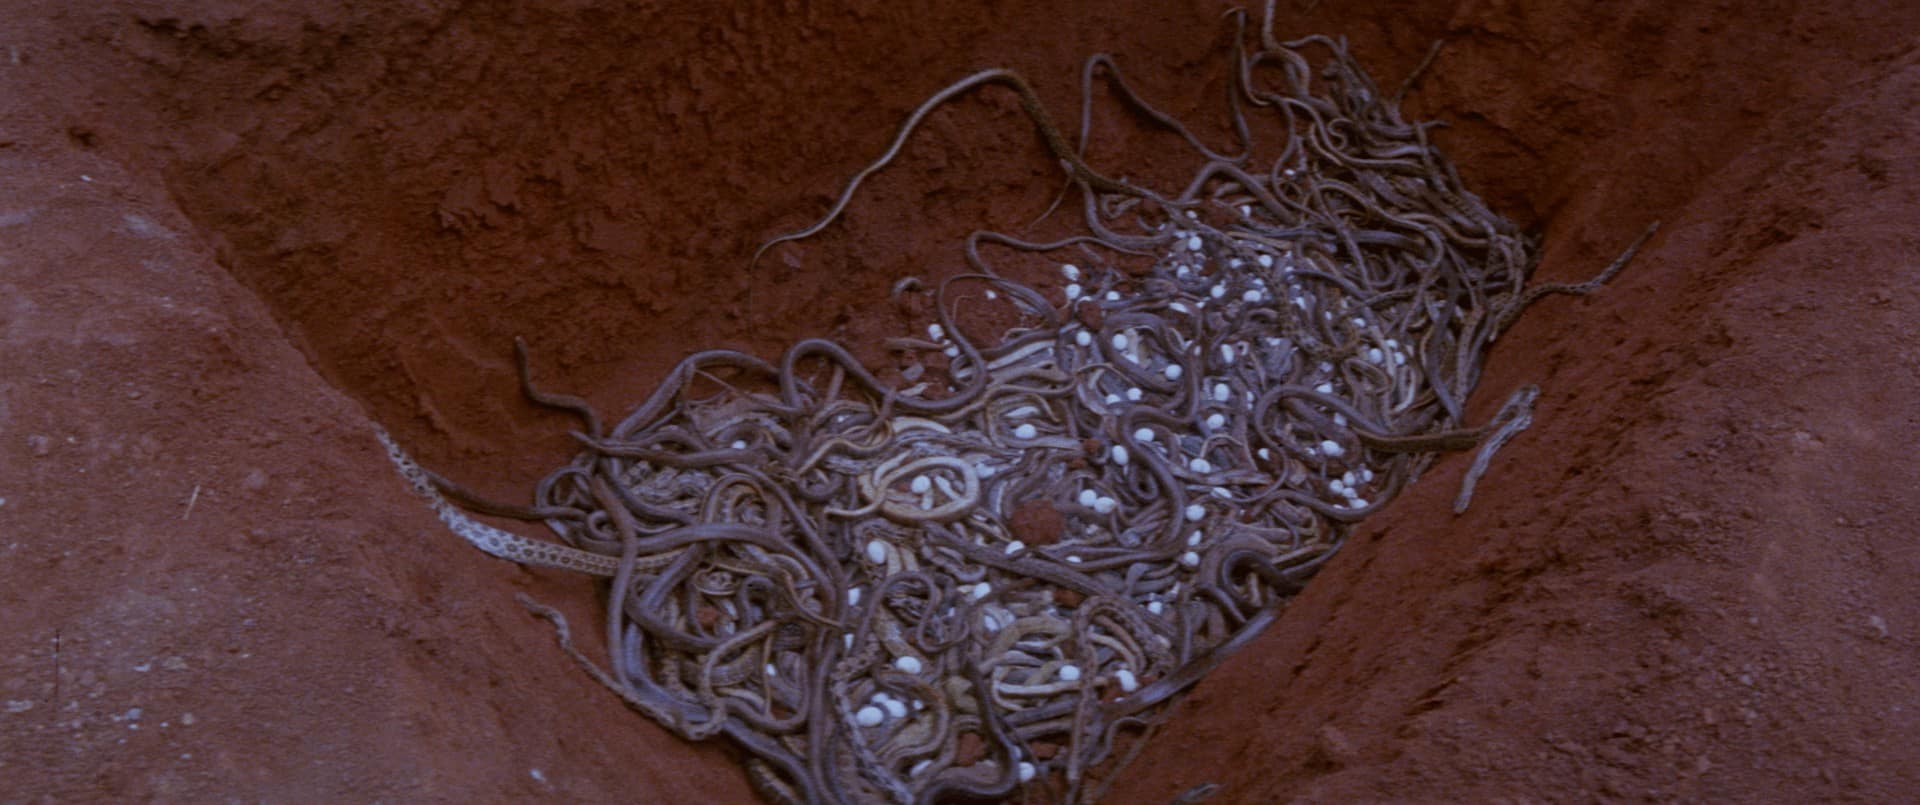 Calamity of Snakes (1982) [Unearthed Films Blu-ray review] 17